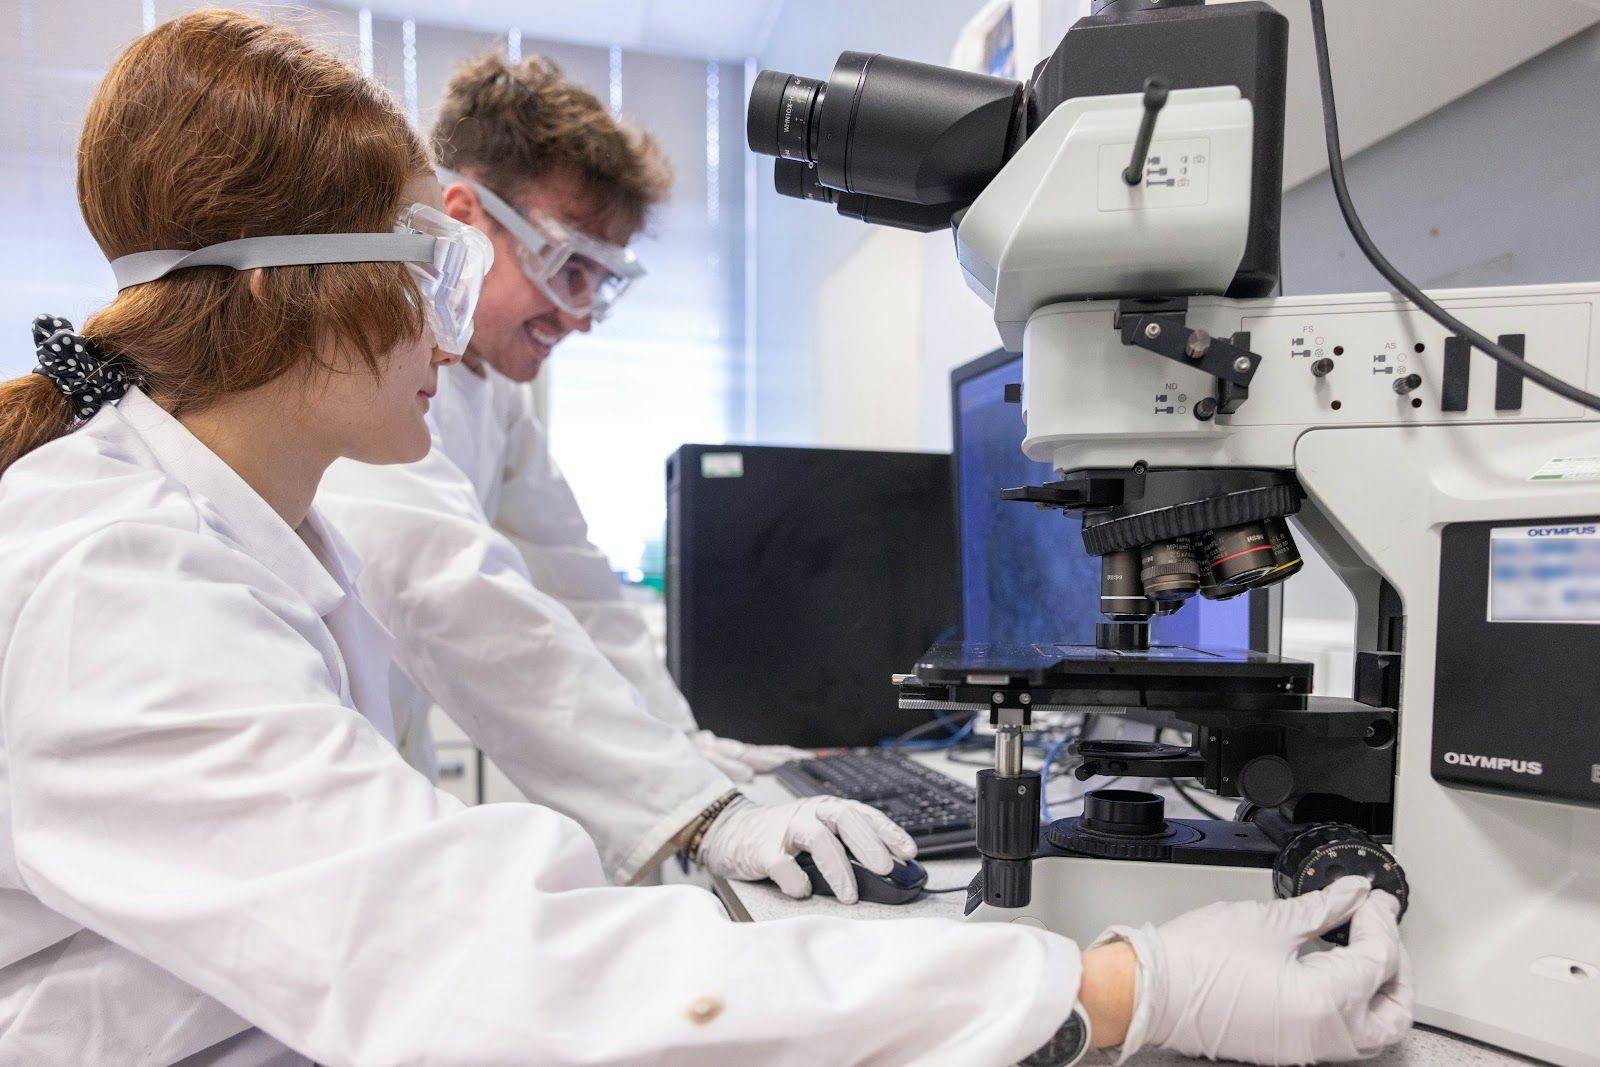 Materials Science undergraduates performing microstructure analysis in Imperial College laboratory